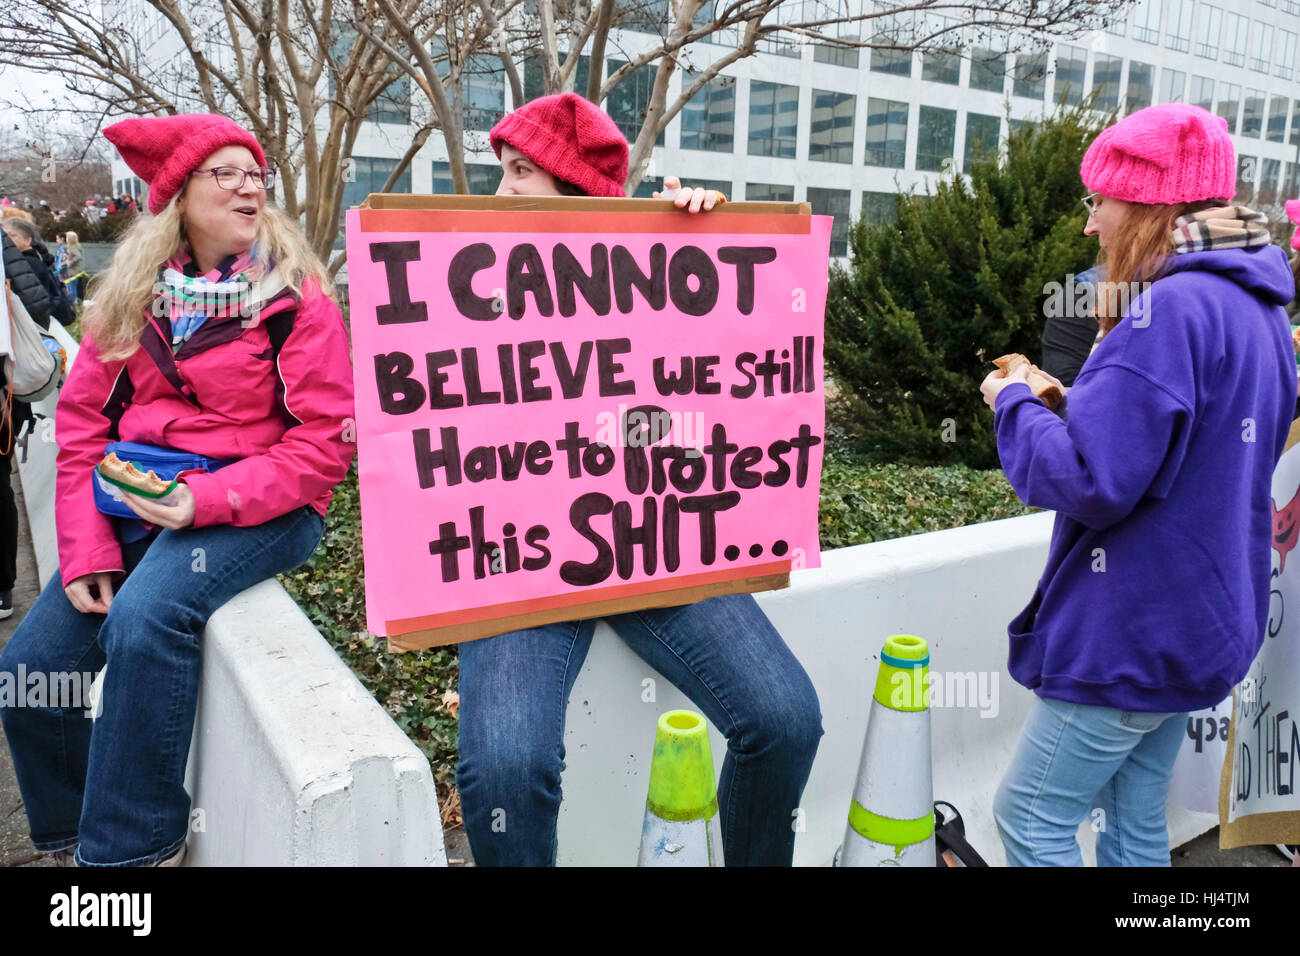 Protesters wearing pink hats and pink or purple jackets at Women's March on Washington DC January 21 2017 Stock Photo